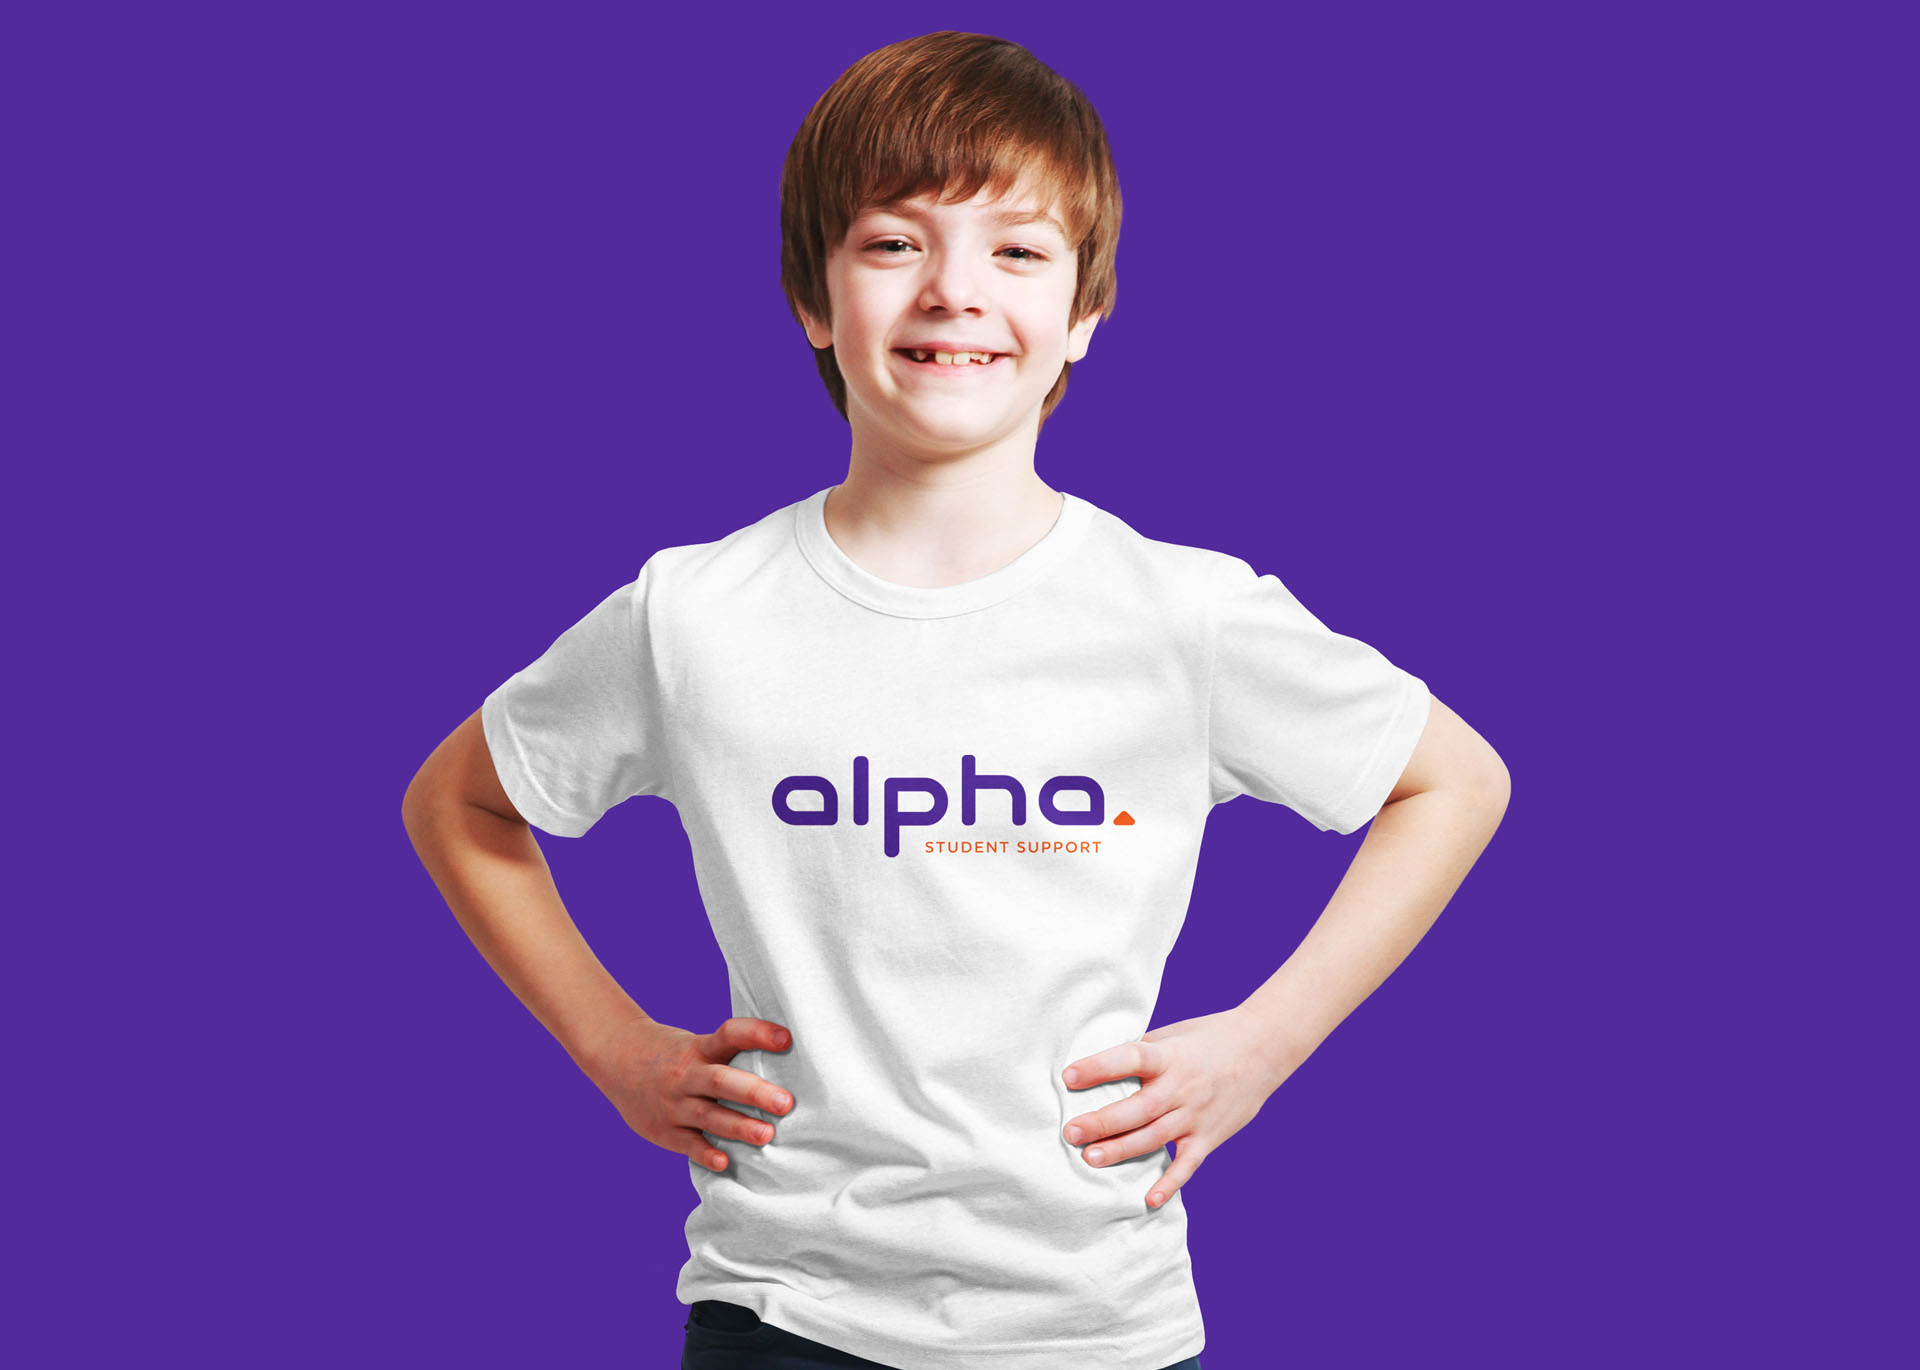 Alpha Student Support